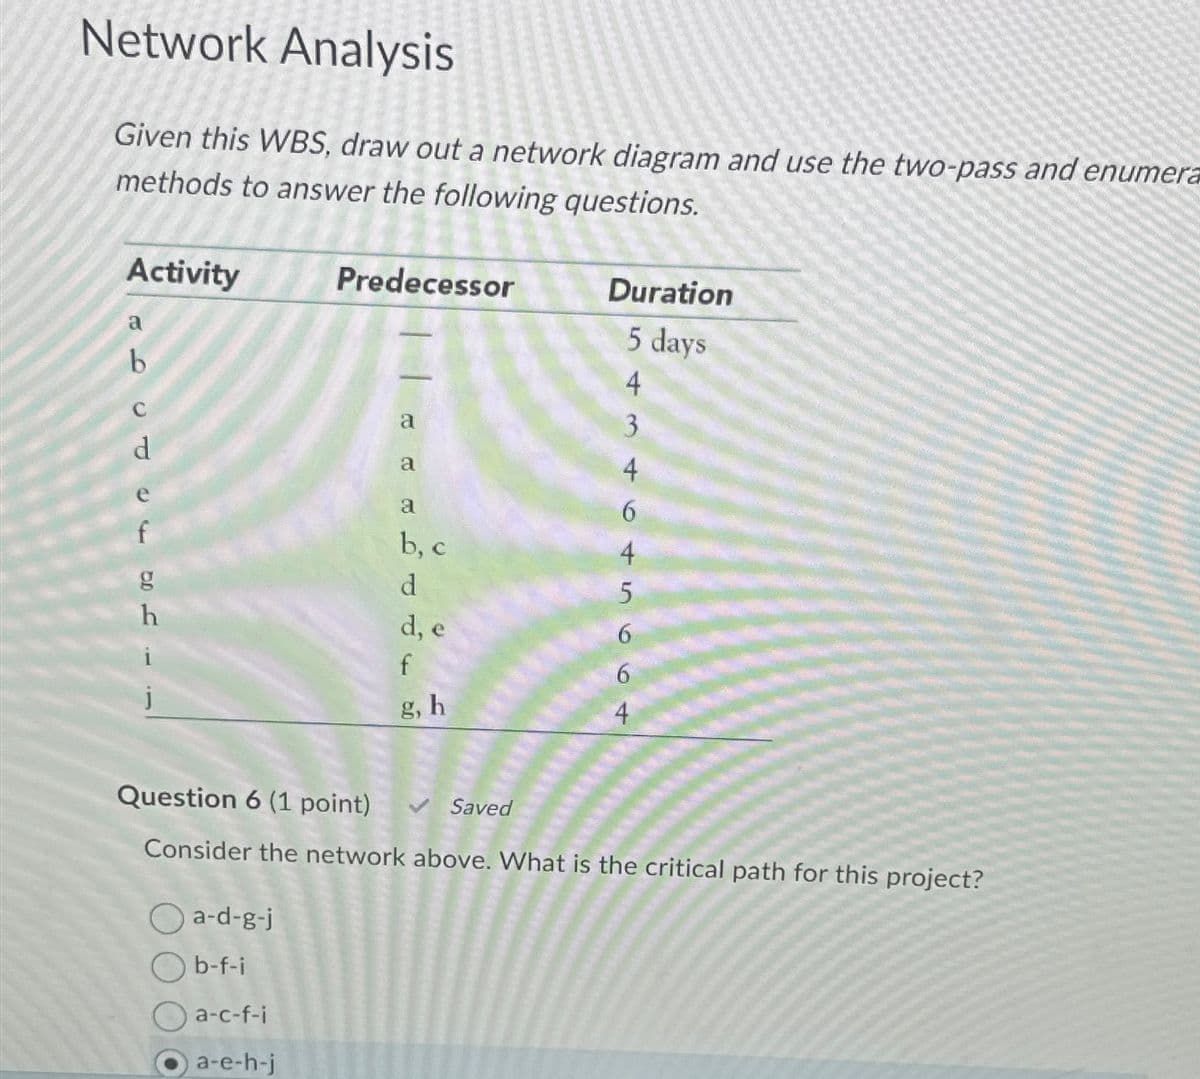 Network Analysis
Given this WBS, draw out a network diagram and use the two-pass and enumera
methods to answer the following questions.
Activity
LCT 50 -
b
a-d-g-j
Predecessor
Ob-f-i
Oa-c-f-i
a-e-h-j
a
a
a
b, c
d
d, e
f
g, h
<***
Duration
5 days
Saved
434 994
6
4
5
Question 6 (1 point)
Consider the network above. What is the critical path for this project?
6
6